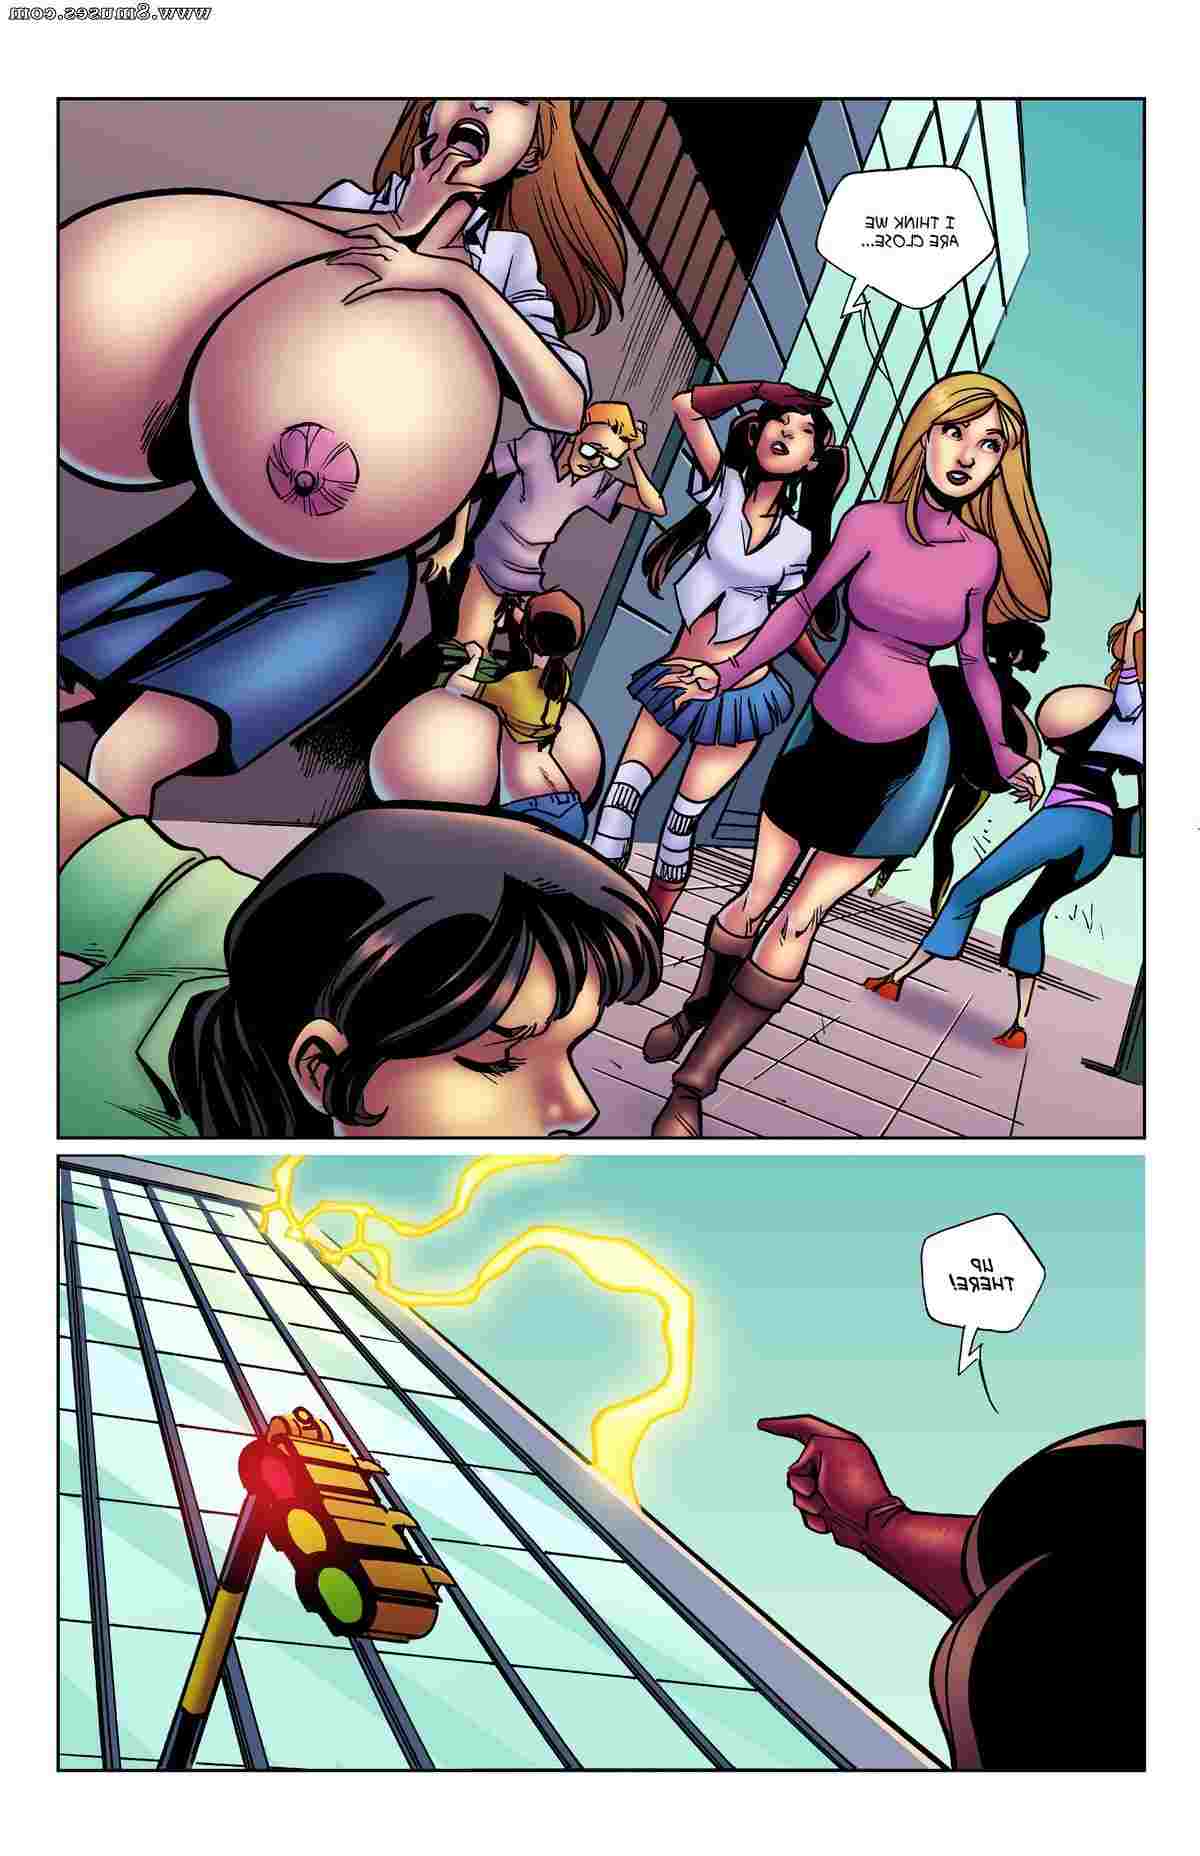 BE-Story-Club-Comics/Collider-The-BE-Particle Collider_-_The_BE_Particle__8muses_-_Sex_and_Porn_Comics_16.jpg